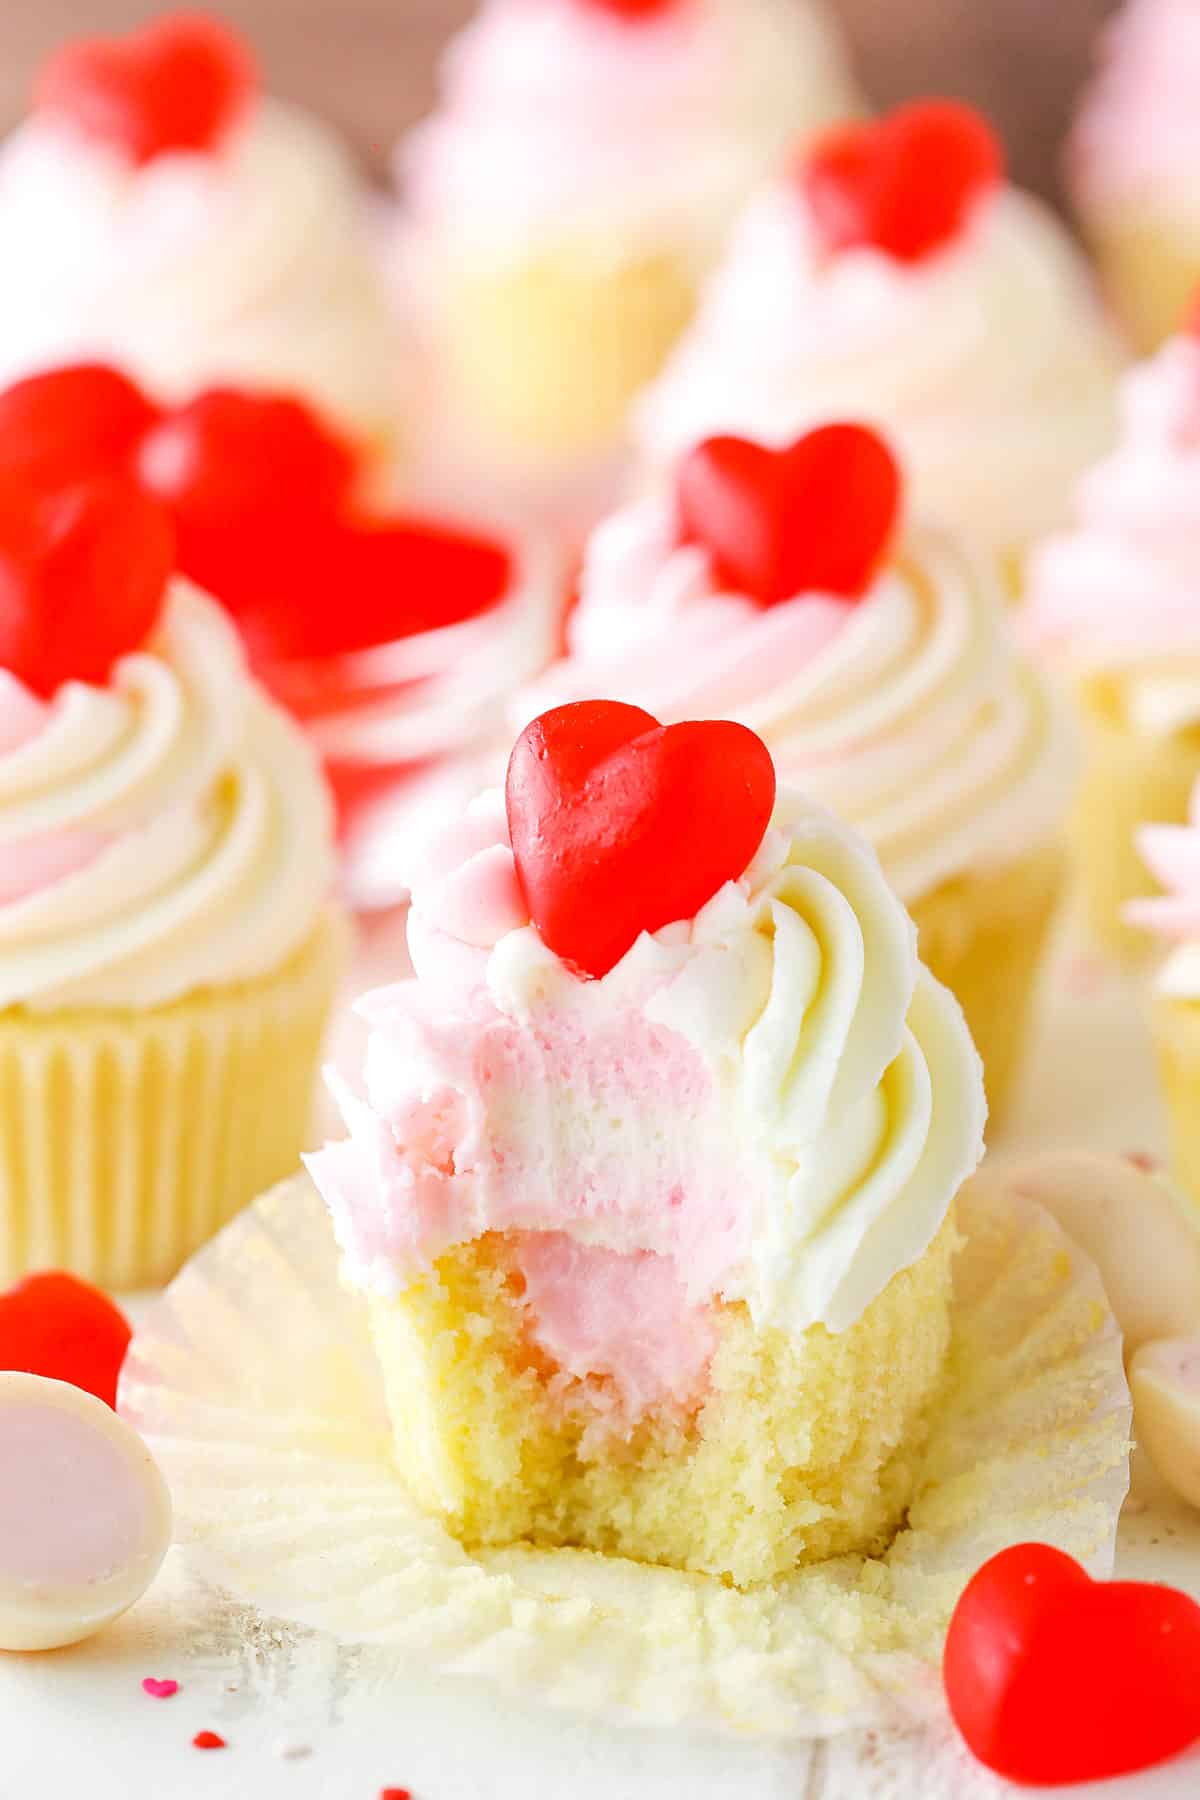 A Strawberry Truffle Cupcake with a bite taken out on a white table